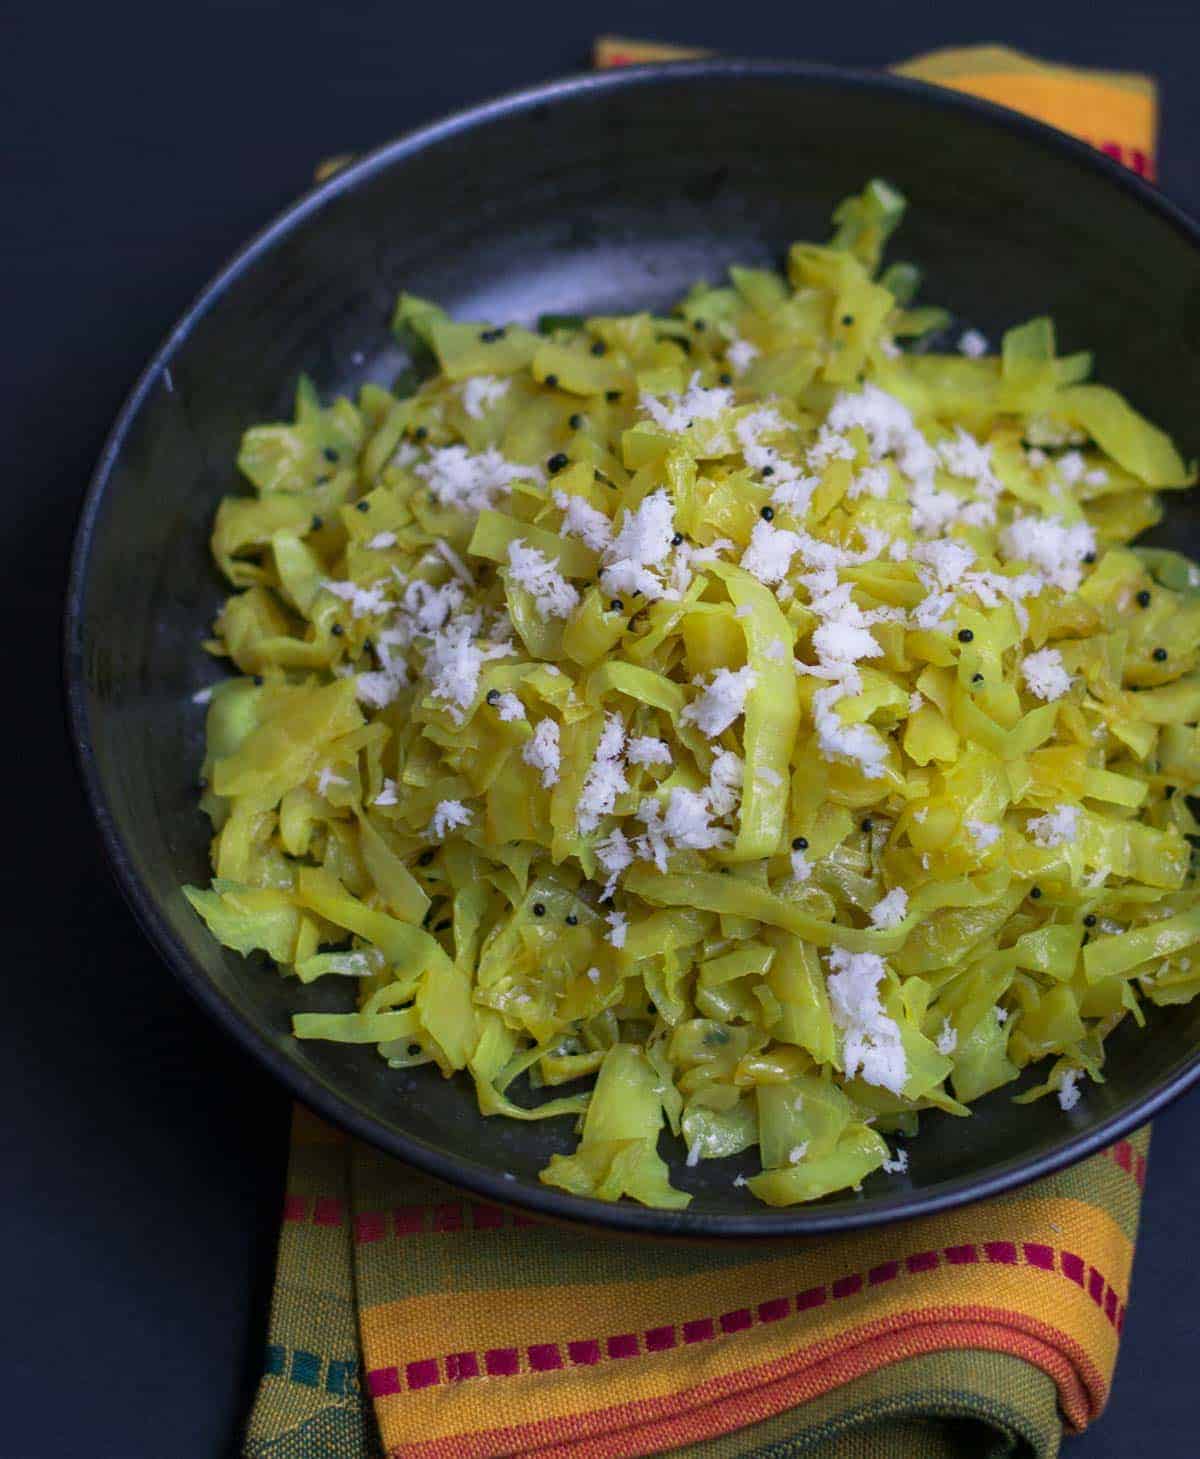 Cabbage Palya or Sukka Recipe - This simple, yet flavorful stir-fried cabbage preparation pairs well with steamed rice and sambar and makes for a perfect afternoon meal. 